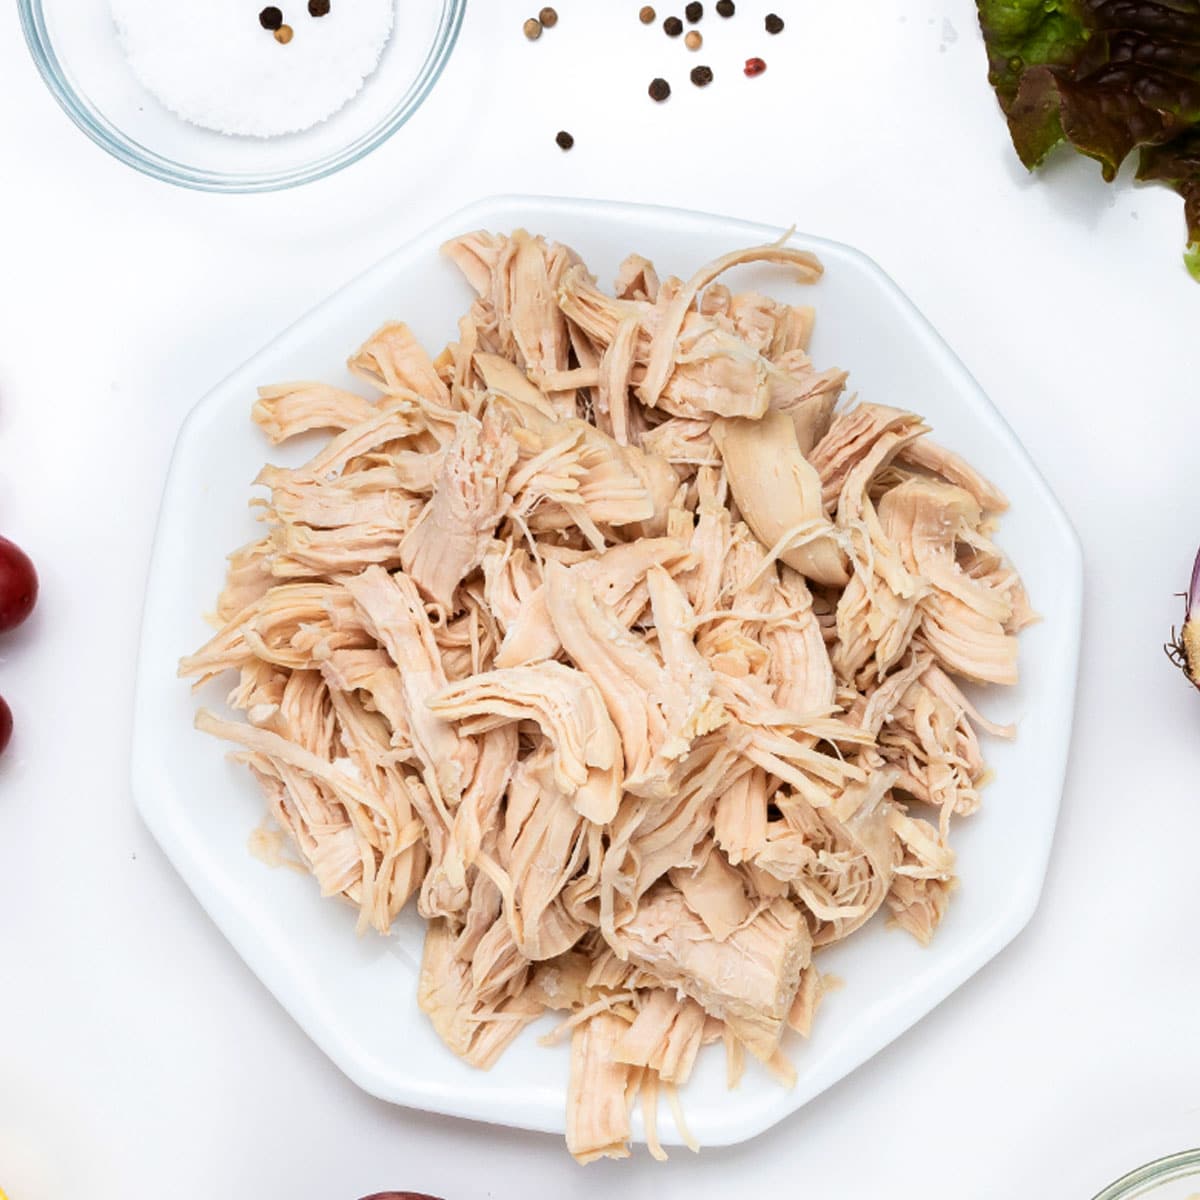 If you're looking for an easy, healthy meal that the entire family will love, look no further than shredded chicken instapot. This dish is simple to make and can be tailored to your liking, making it a perfect weeknight meal.